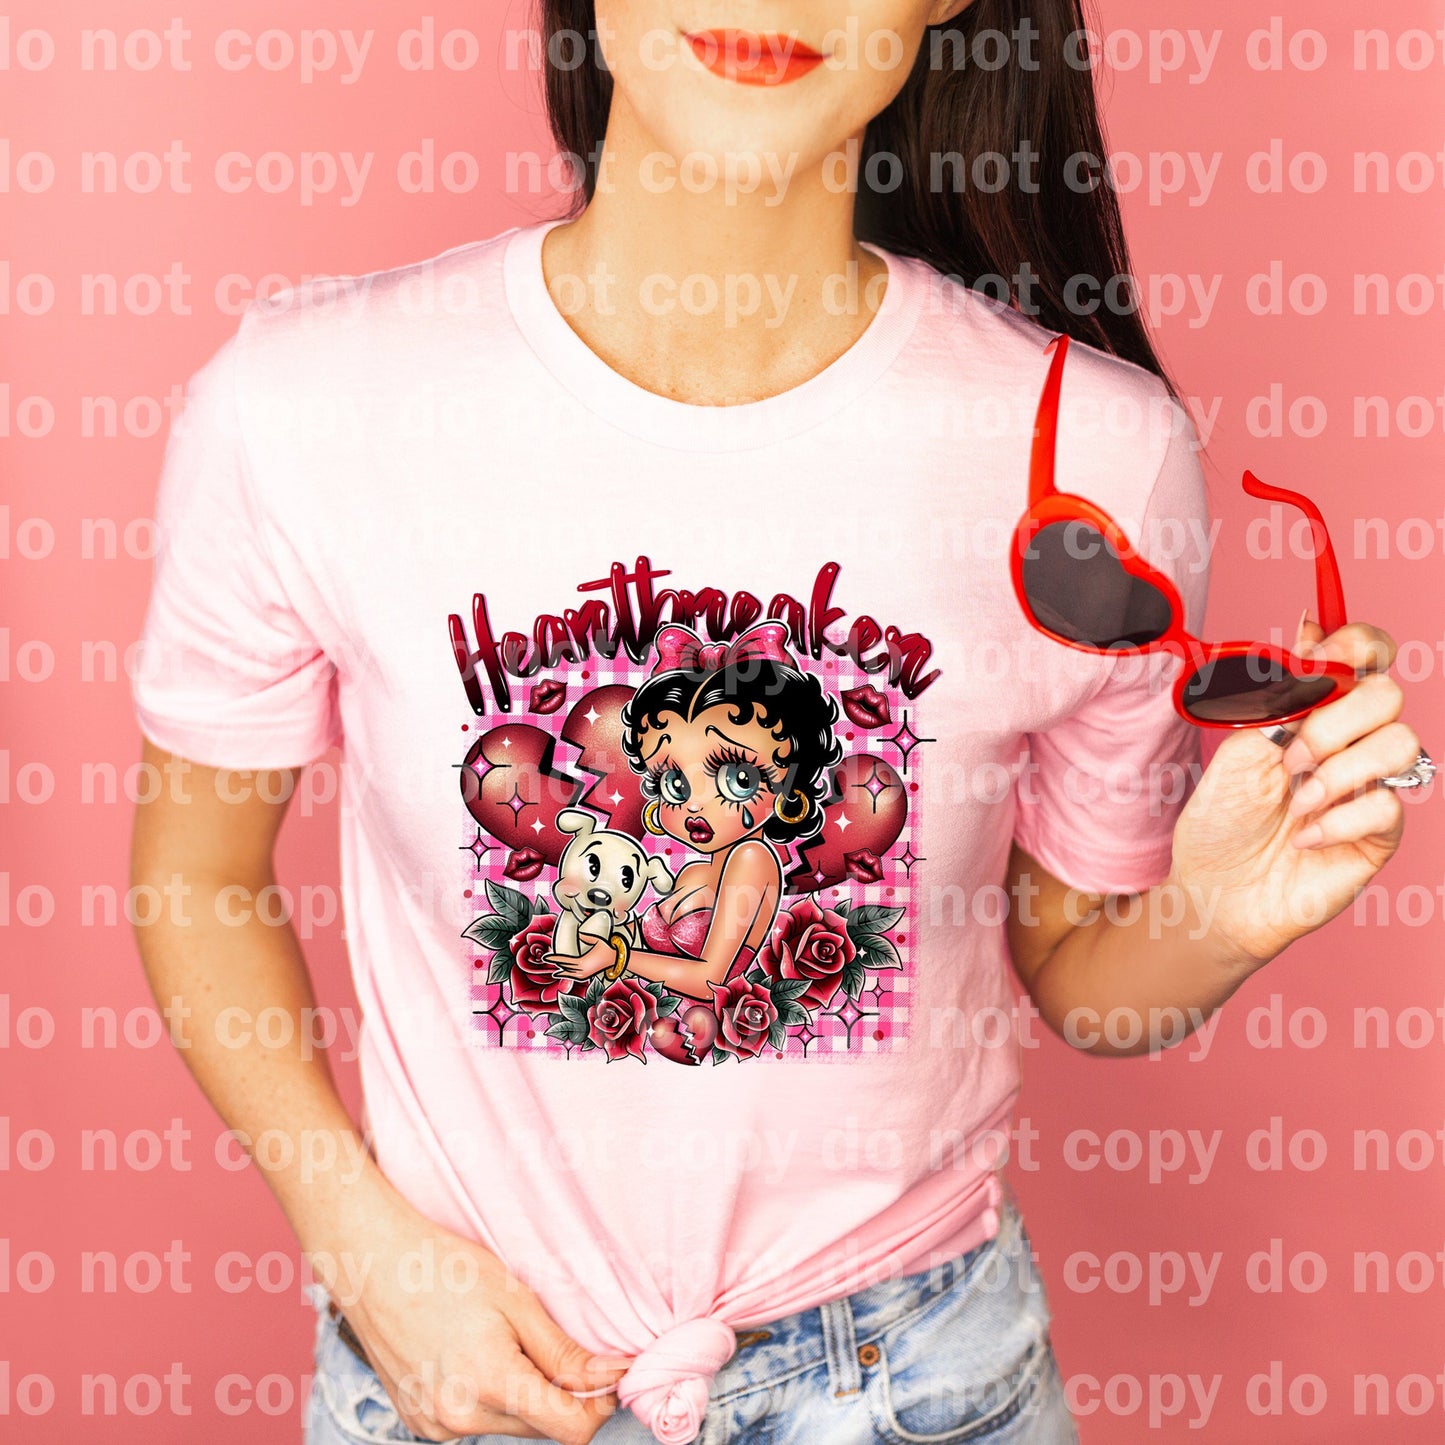 Heart Breaker Betty Plaid with Optional Sleeve Design Dream Print or Sublimation Print